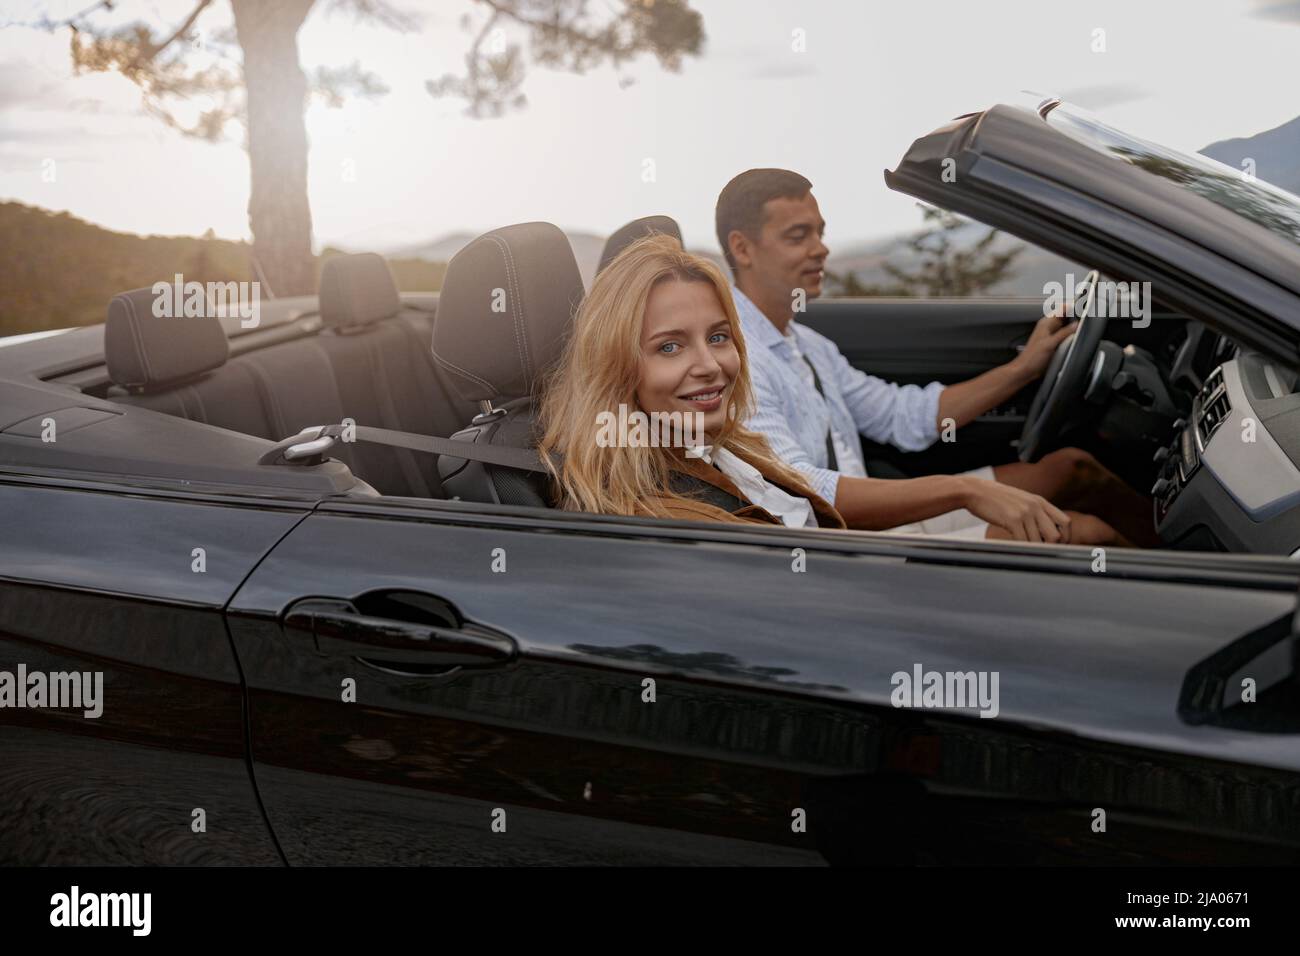 Close up of joyful young female smiling sitting in car with handsome man driving Stock Photo